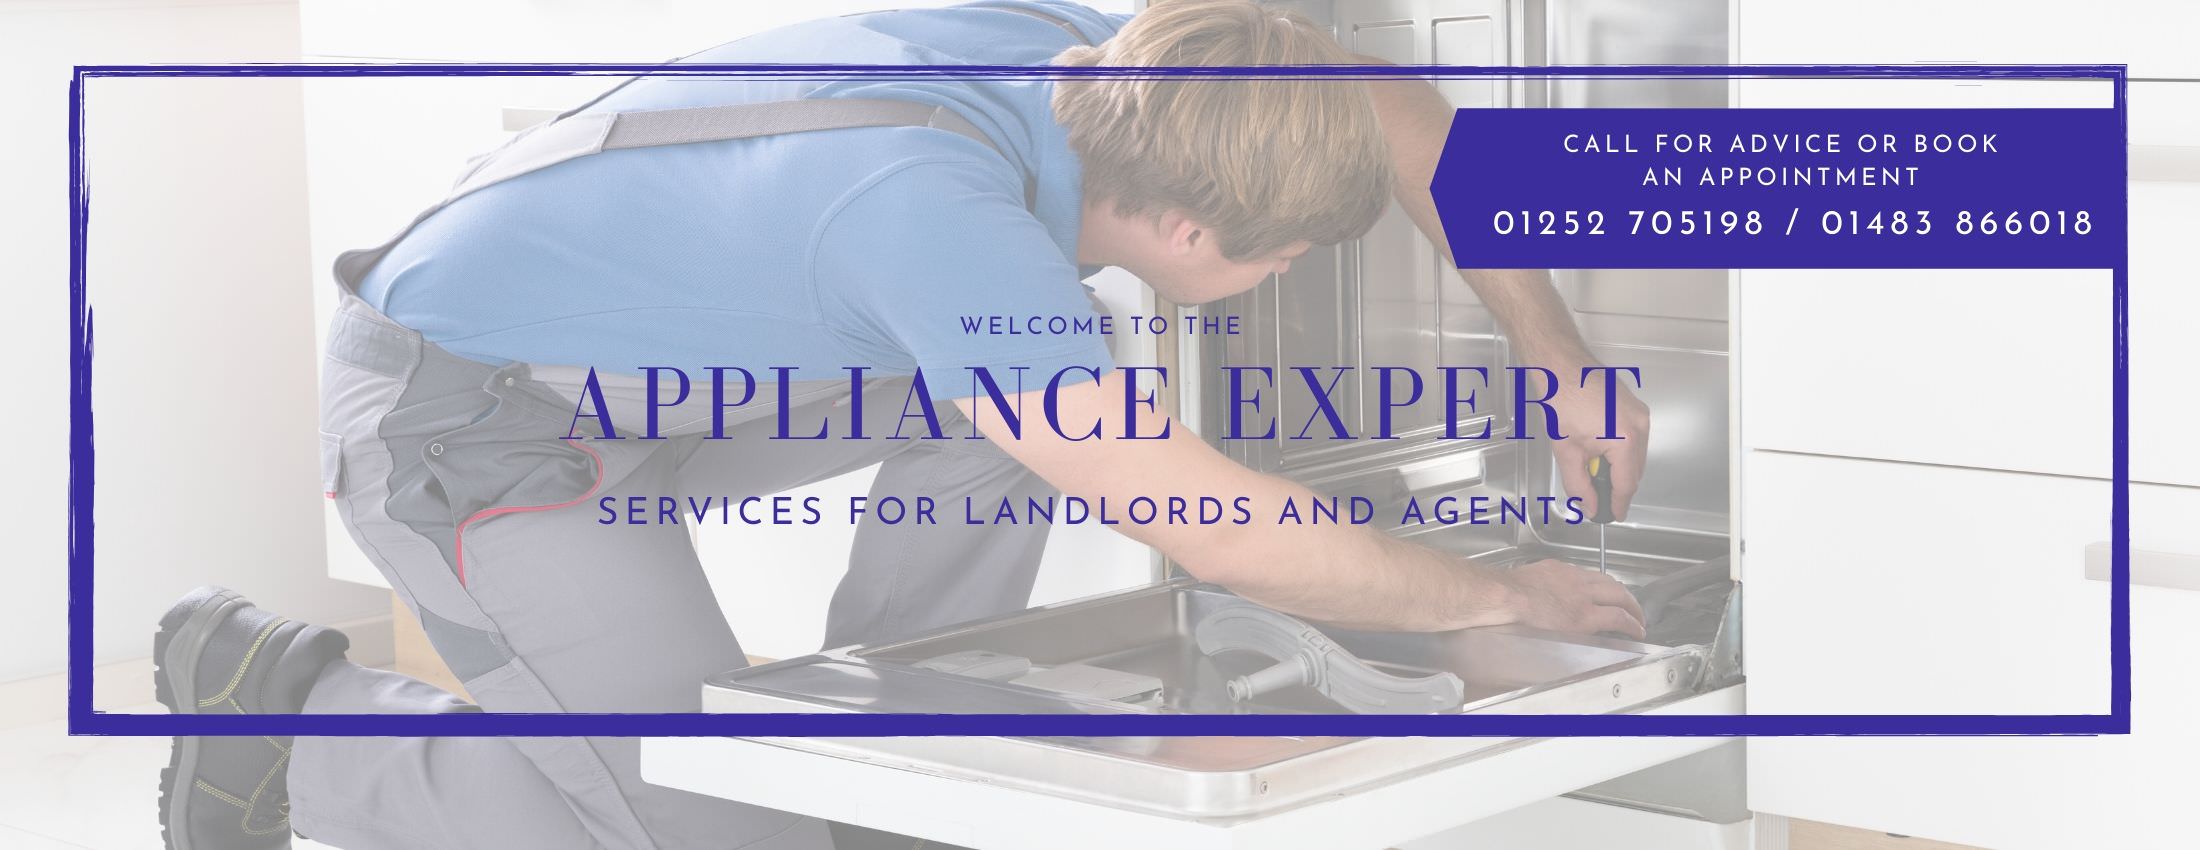 Appliance Expert offering services to landlords and agents.